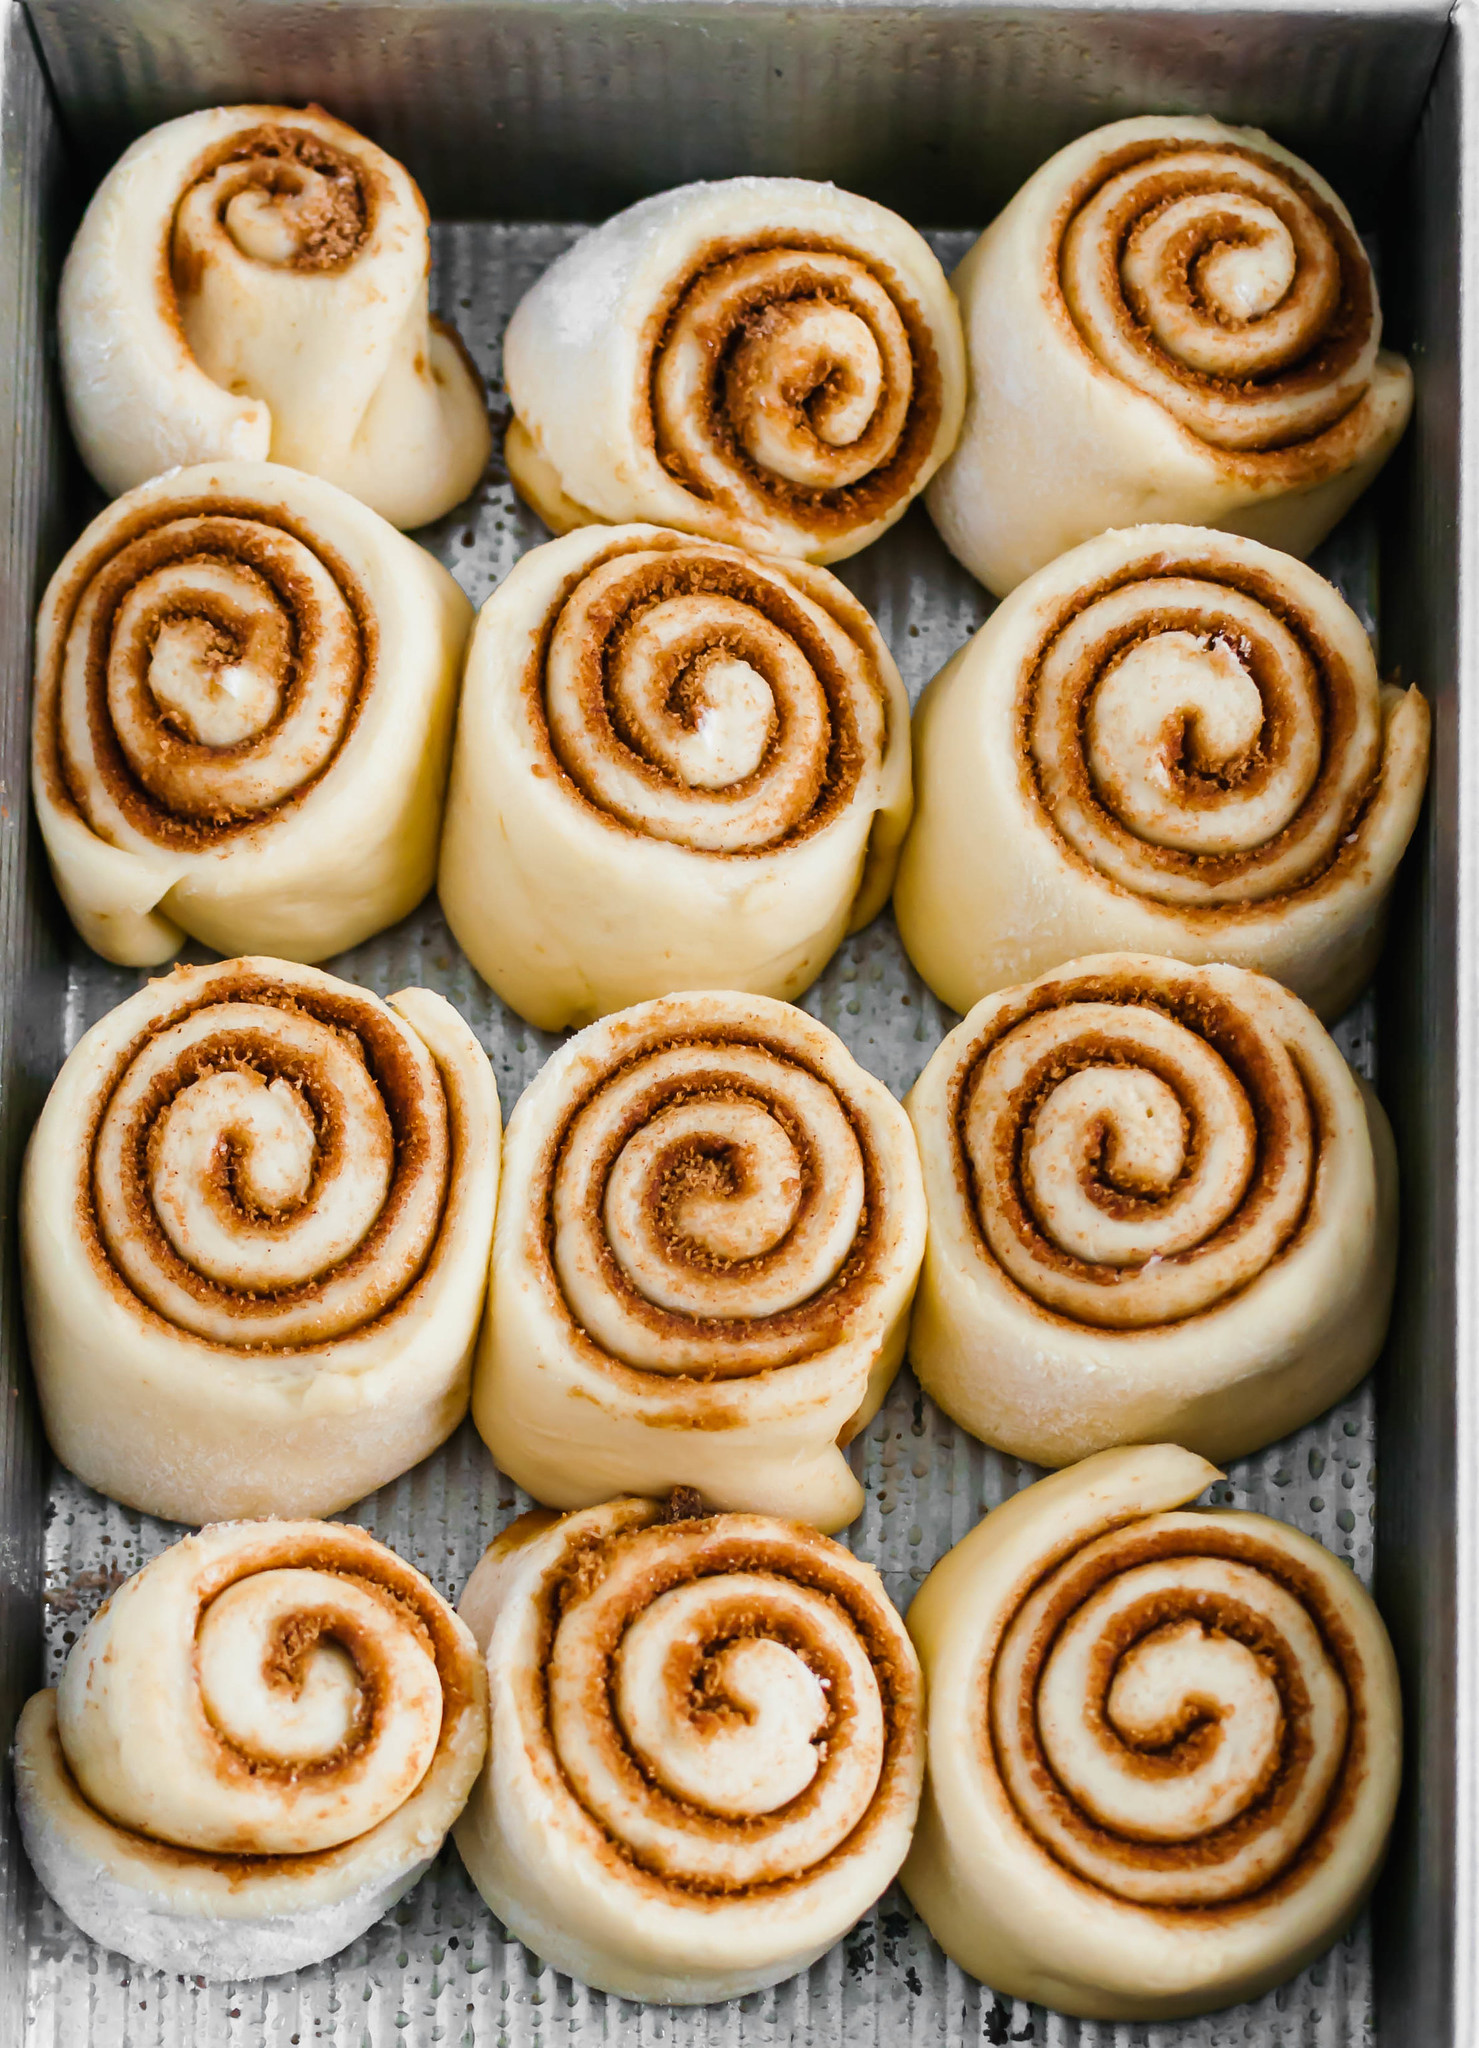 Making you own Copycat Cinnabon Cinnamon Rolls is easier than you may think. You're only a few basic ingredients and 3 hours away from the most delicious cinnamon rolls. Let's get baking.